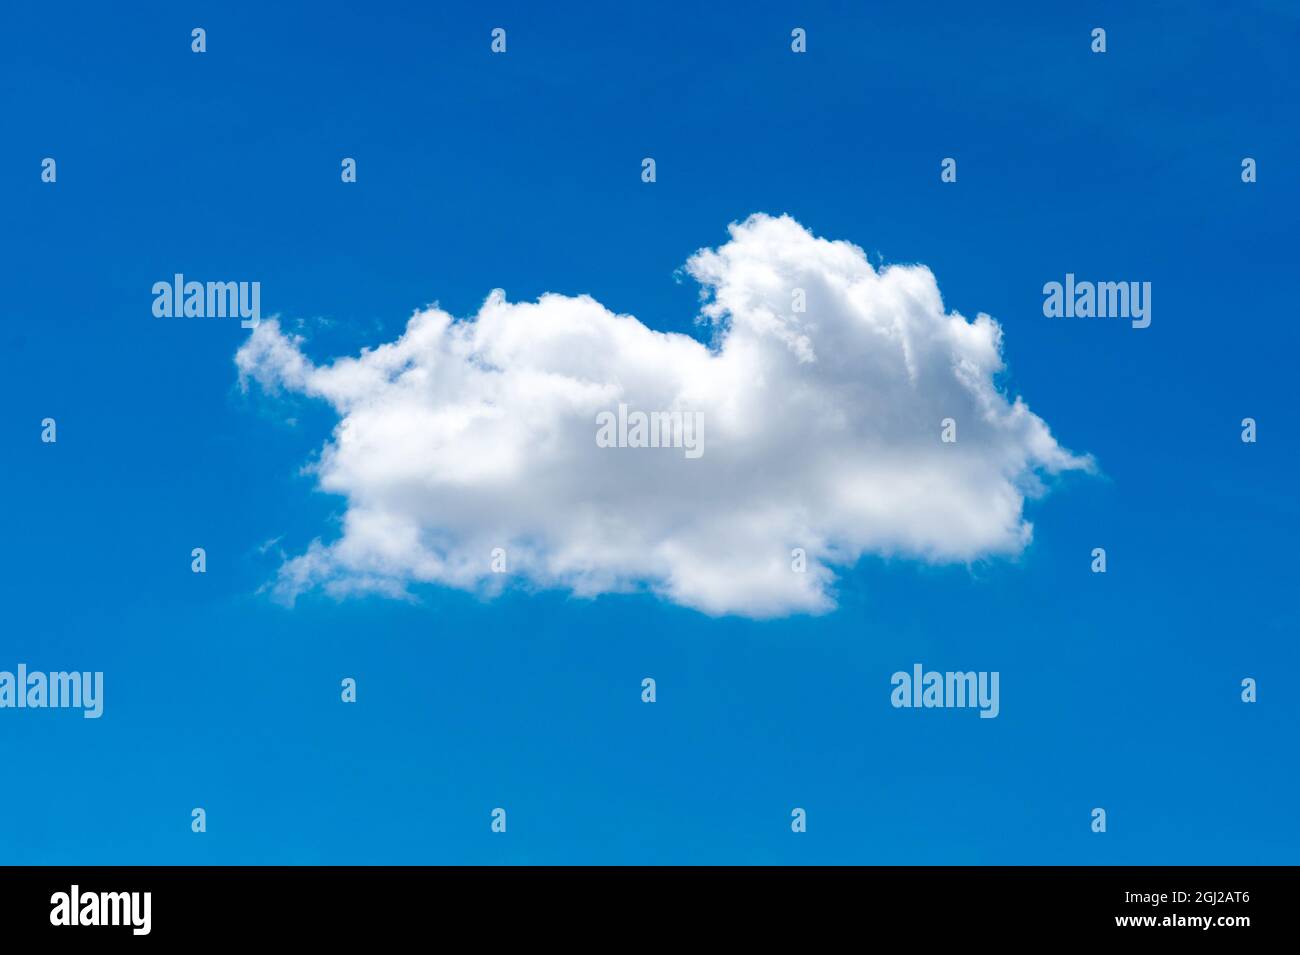 Nature single white cloud on blue sky background in daytime Stock Photo